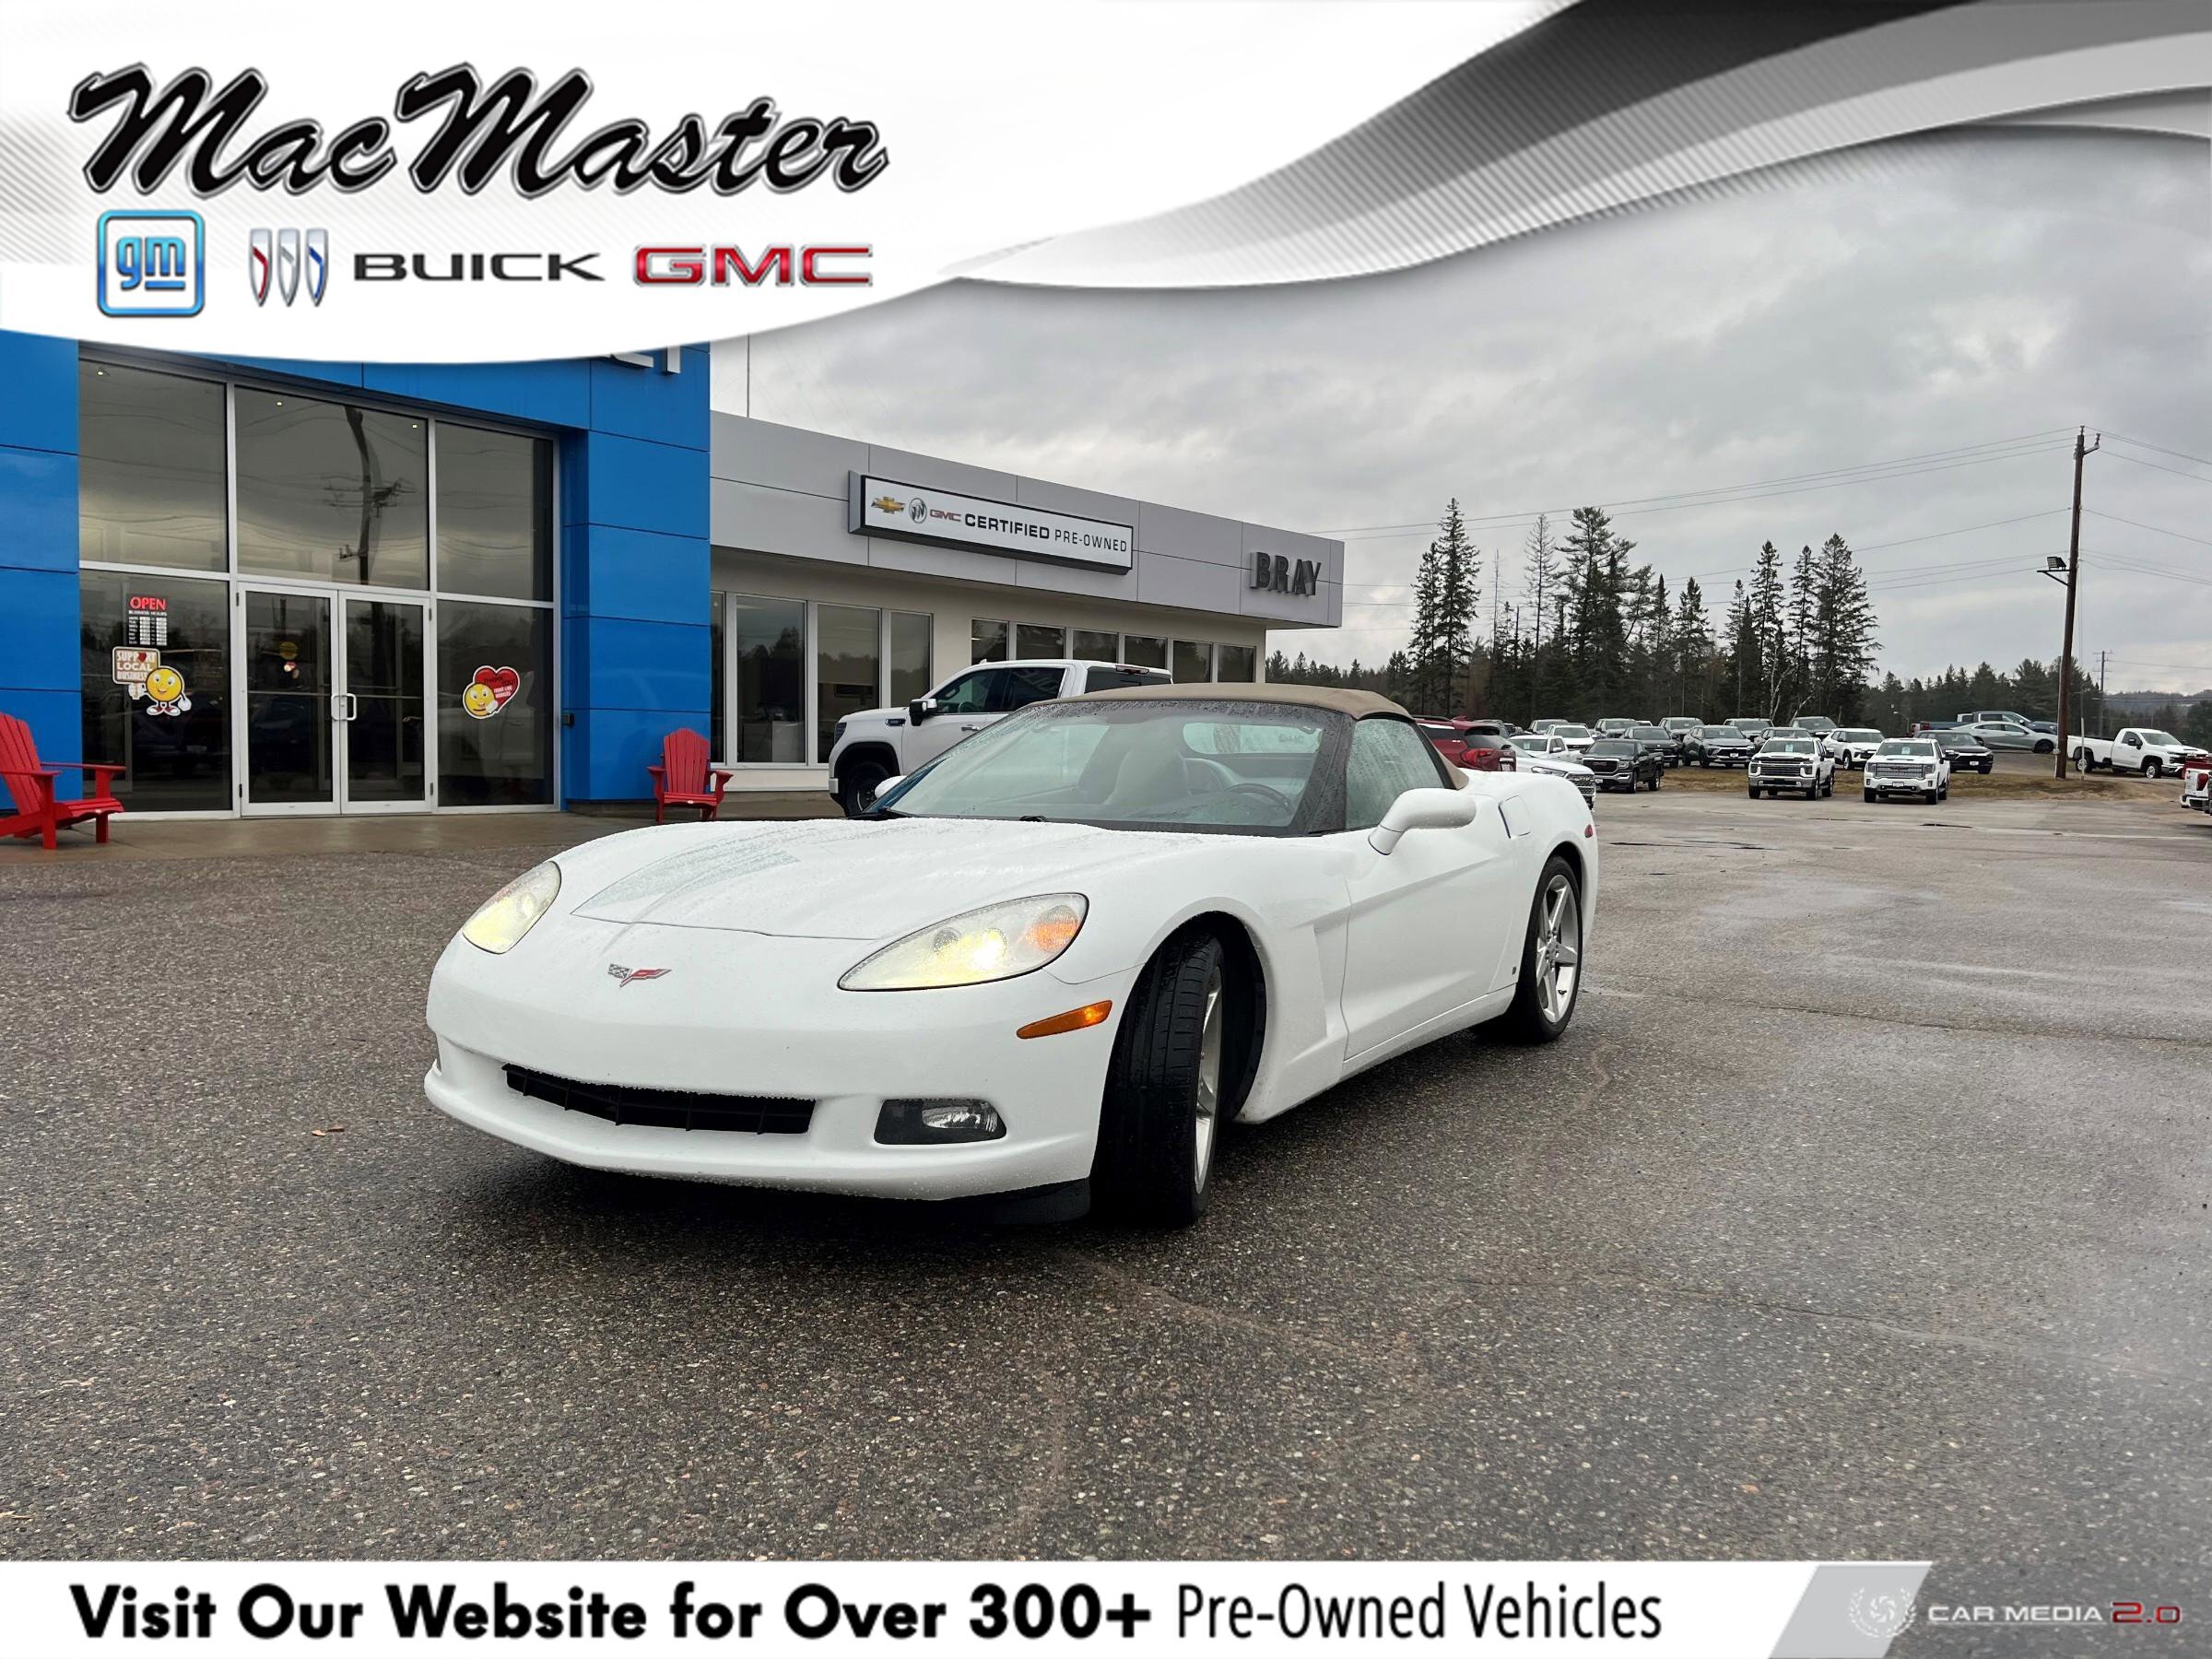 2006 Chevrolet Corvette CERTIFIED AS-TRADED WITH A CLEAN CARFAX REPORT!